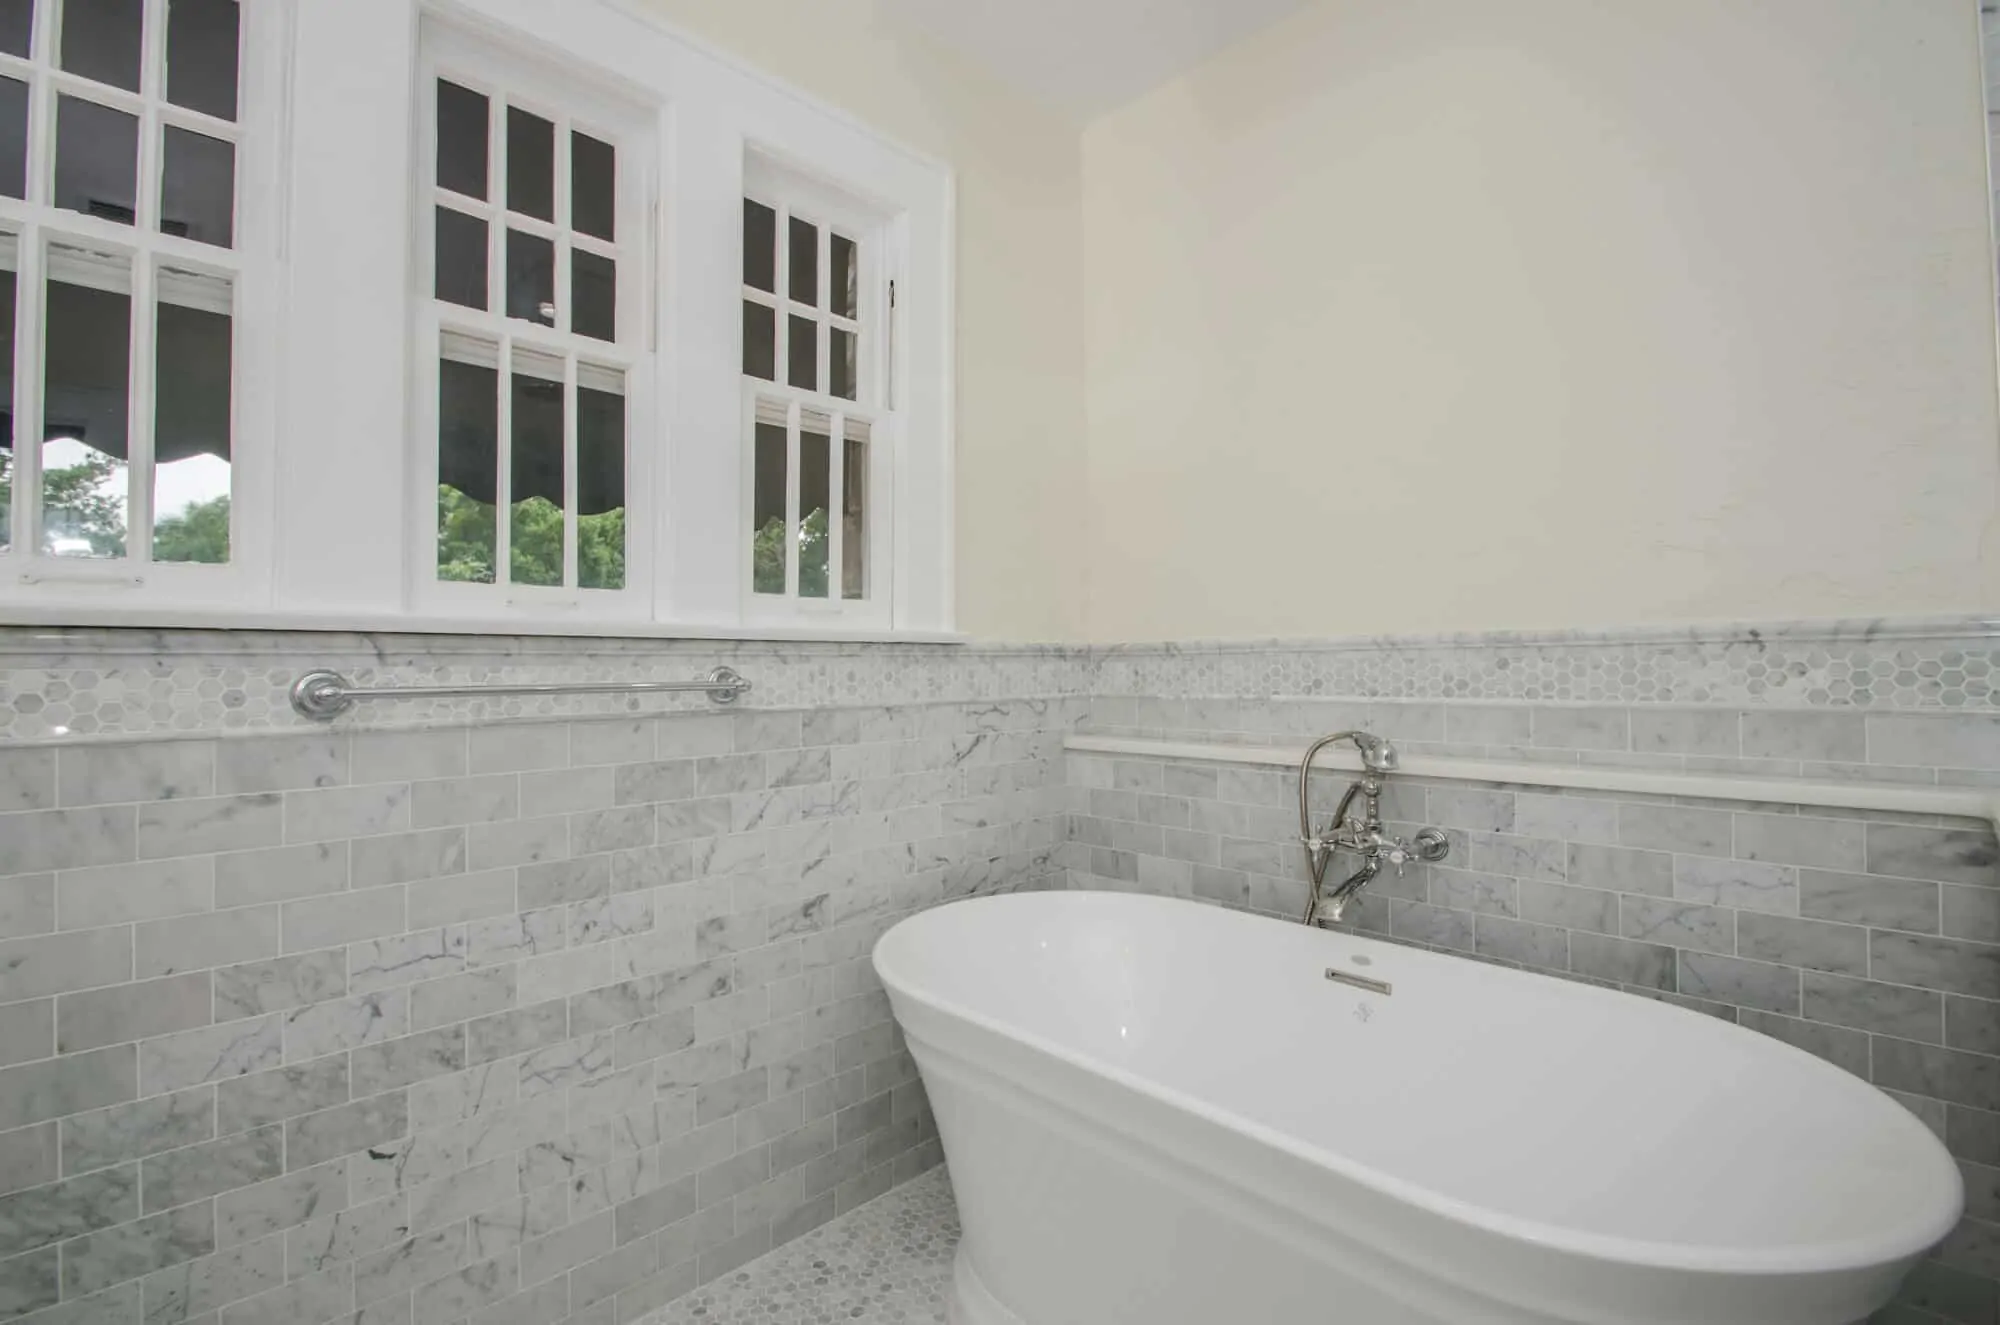 vintage style bath remodel featuring marble walls